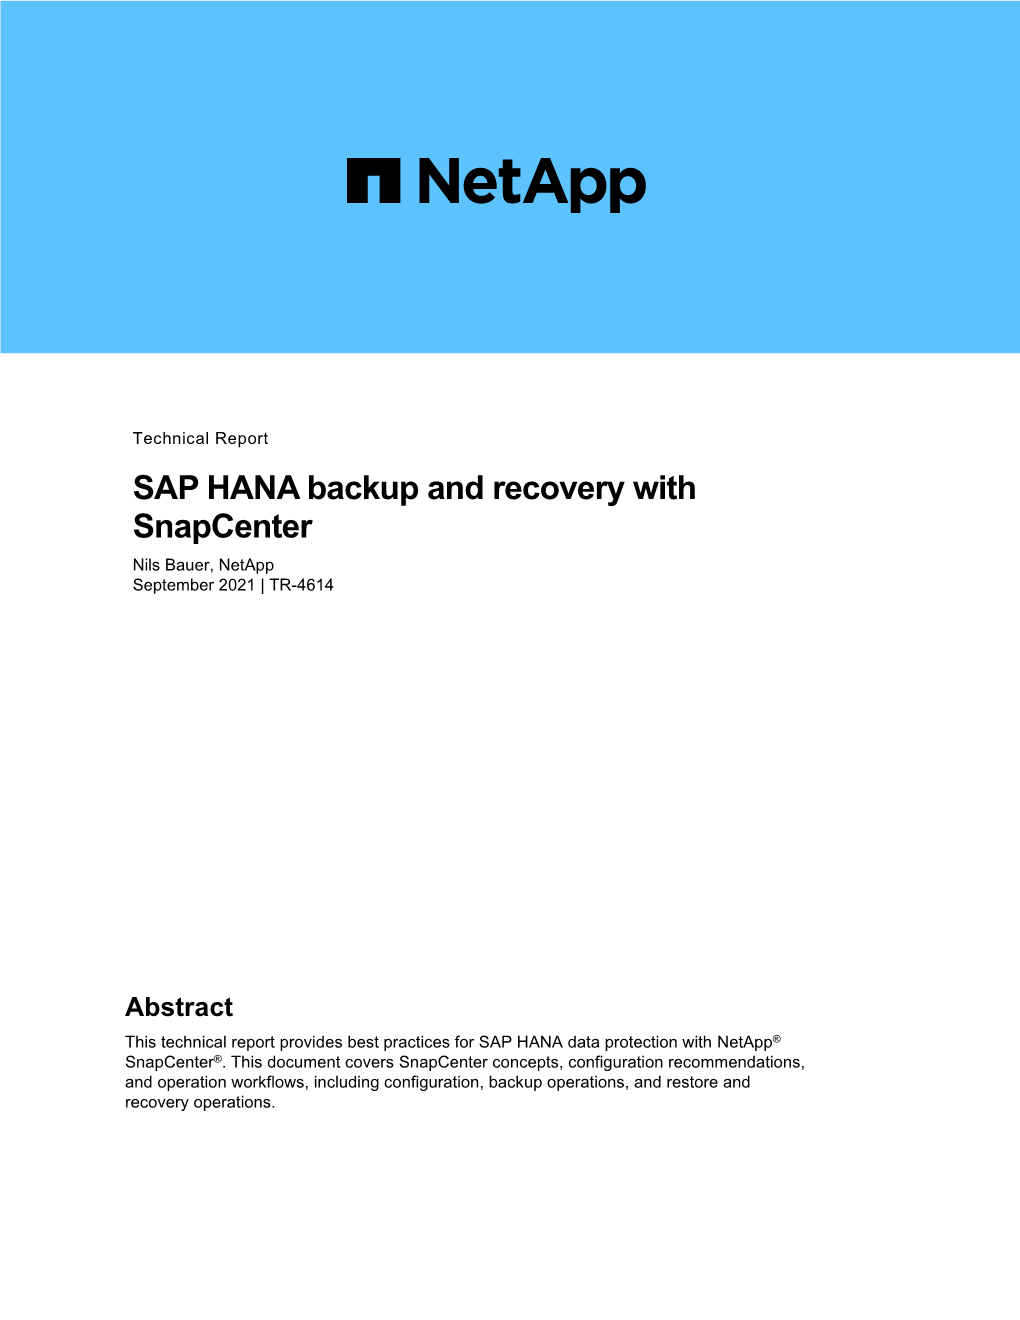 TR-4614: SAP HANA Backup Recovery with Snapcenter